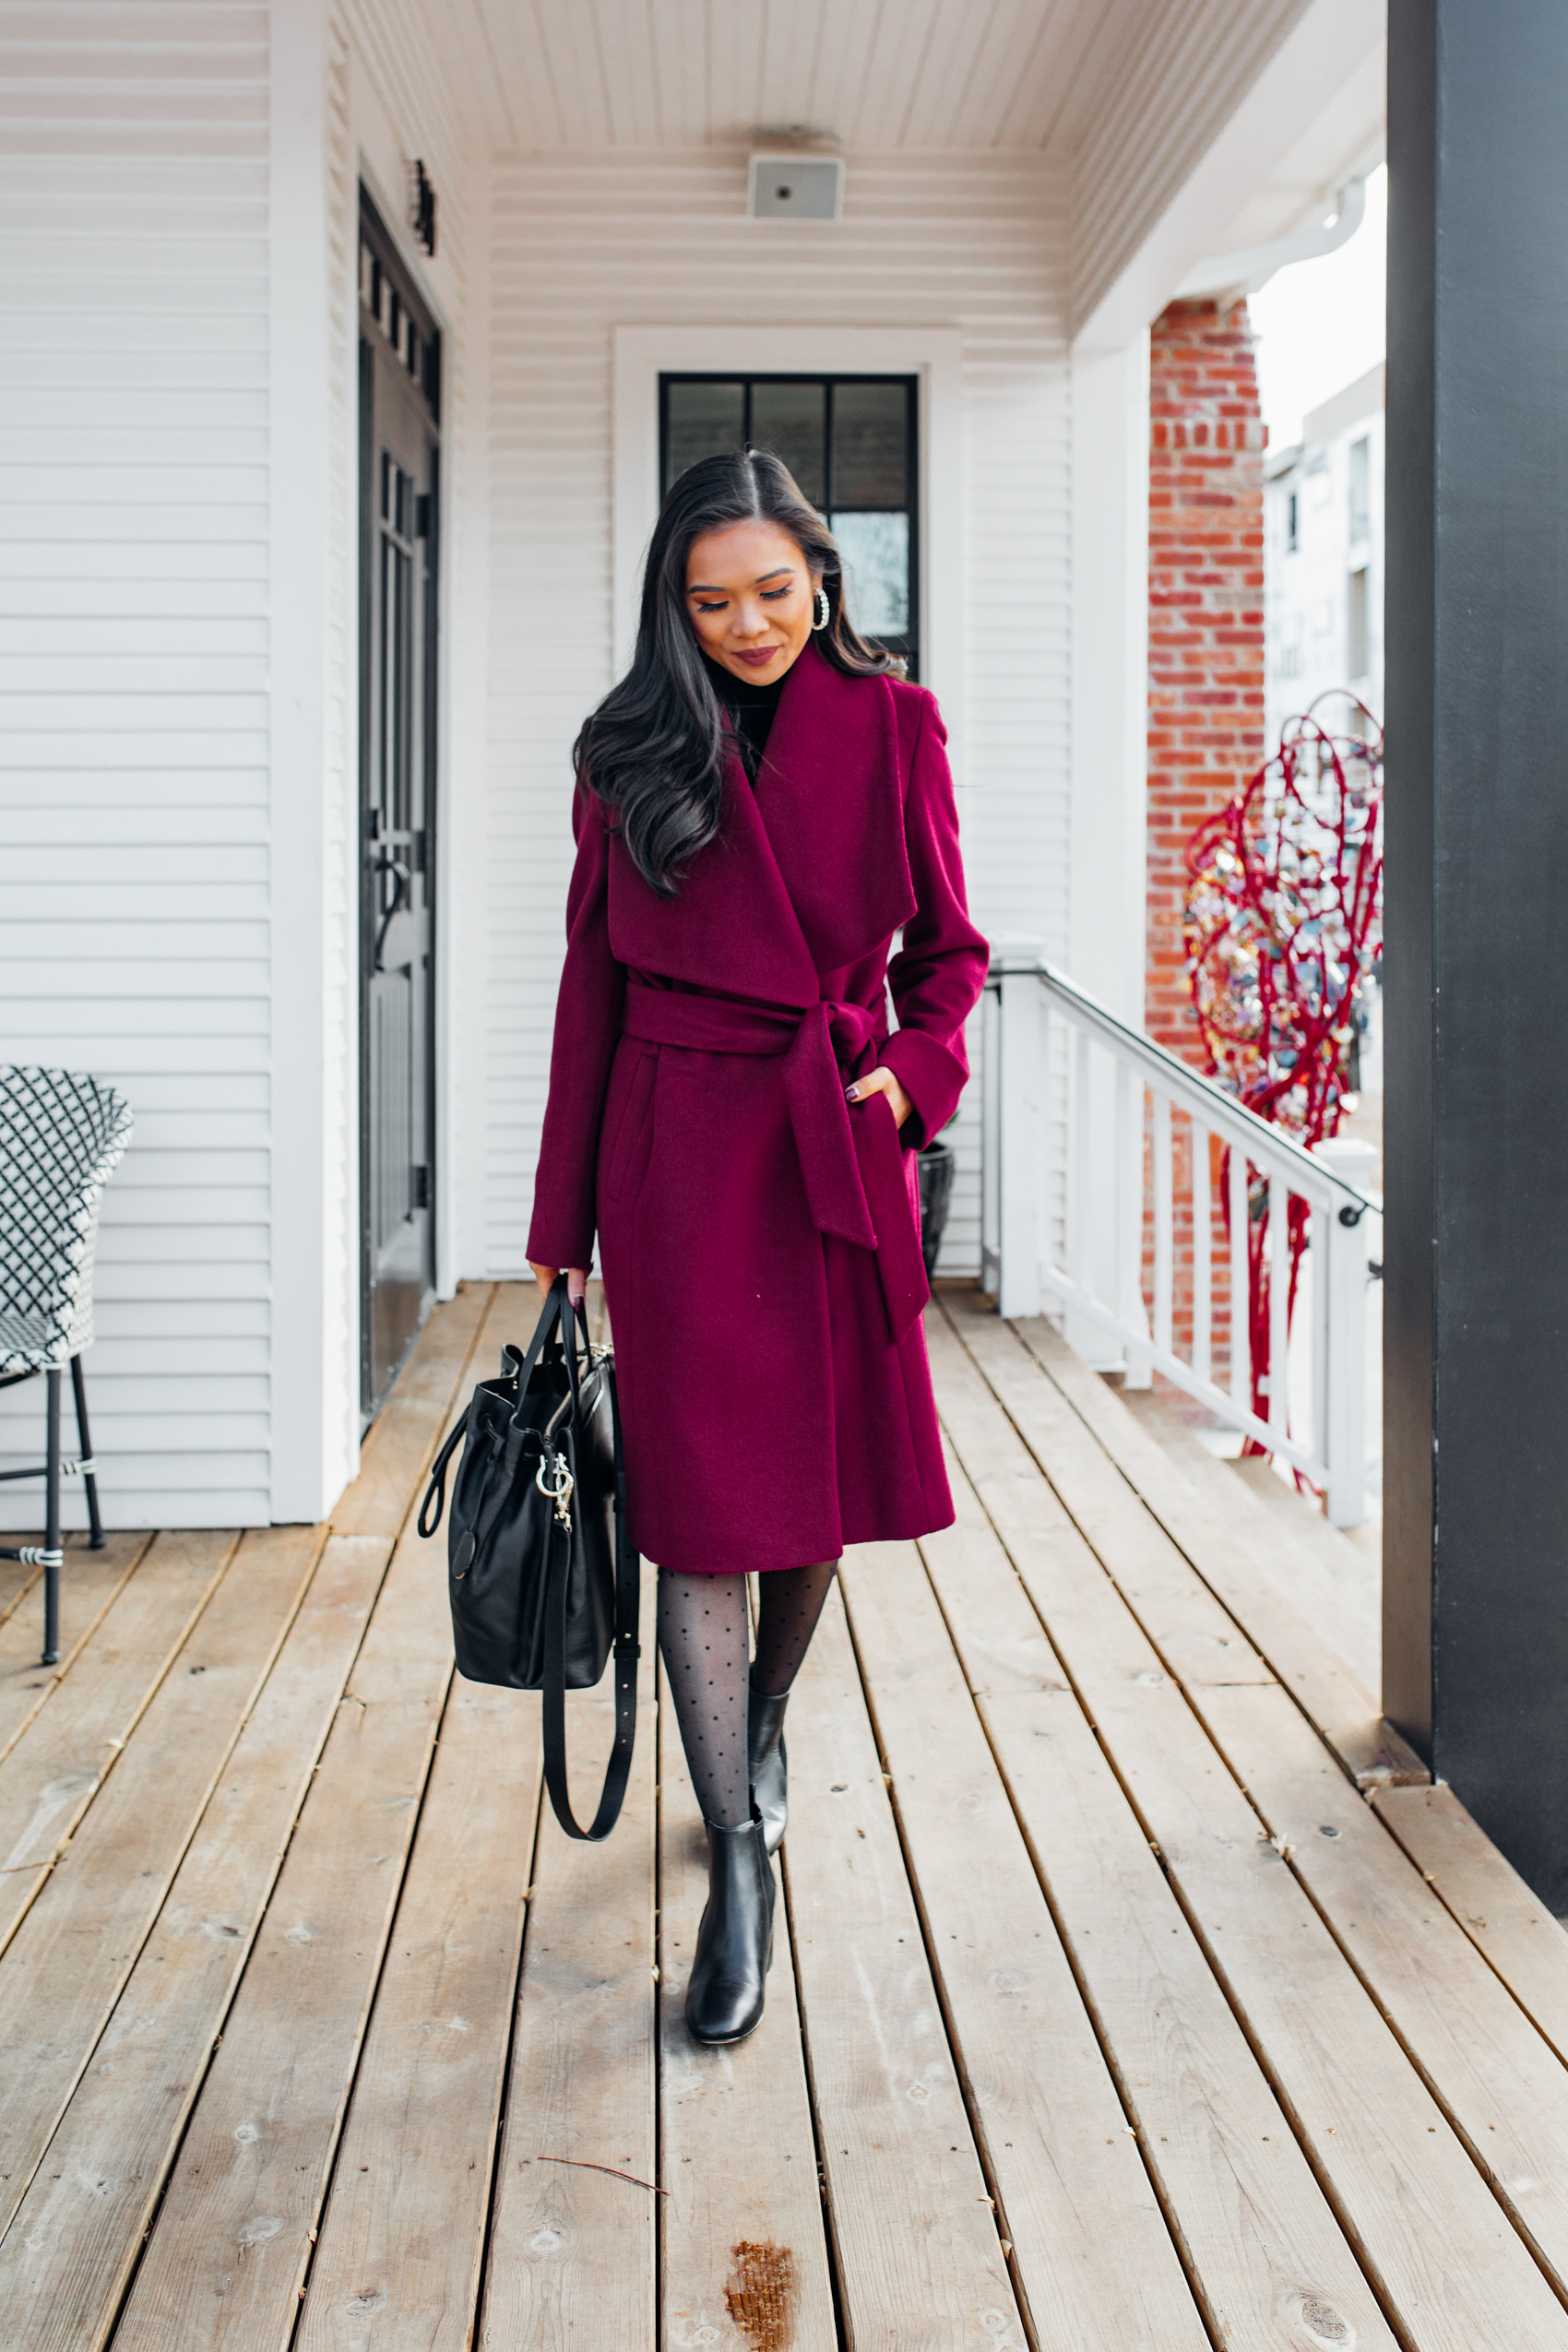 Luxury gifts for women without the price tag - Blogger Hoang-Kim styles a Cole Haan Wrap coat